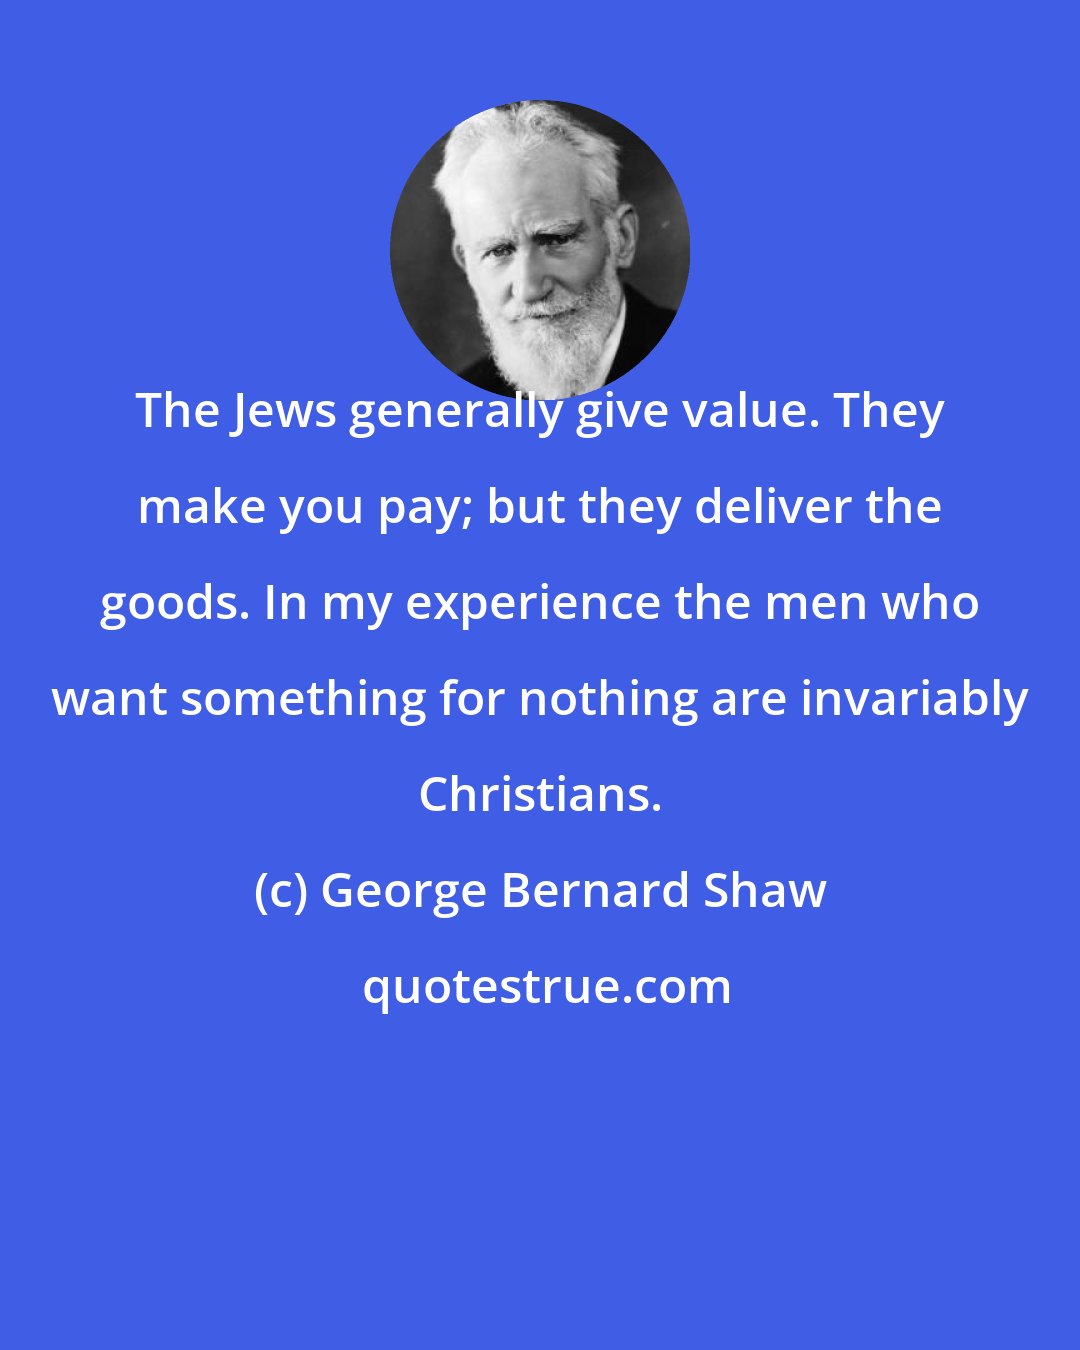 George Bernard Shaw: The Jews generally give value. They make you pay; but they deliver the goods. In my experience the men who want something for nothing are invariably Christians.